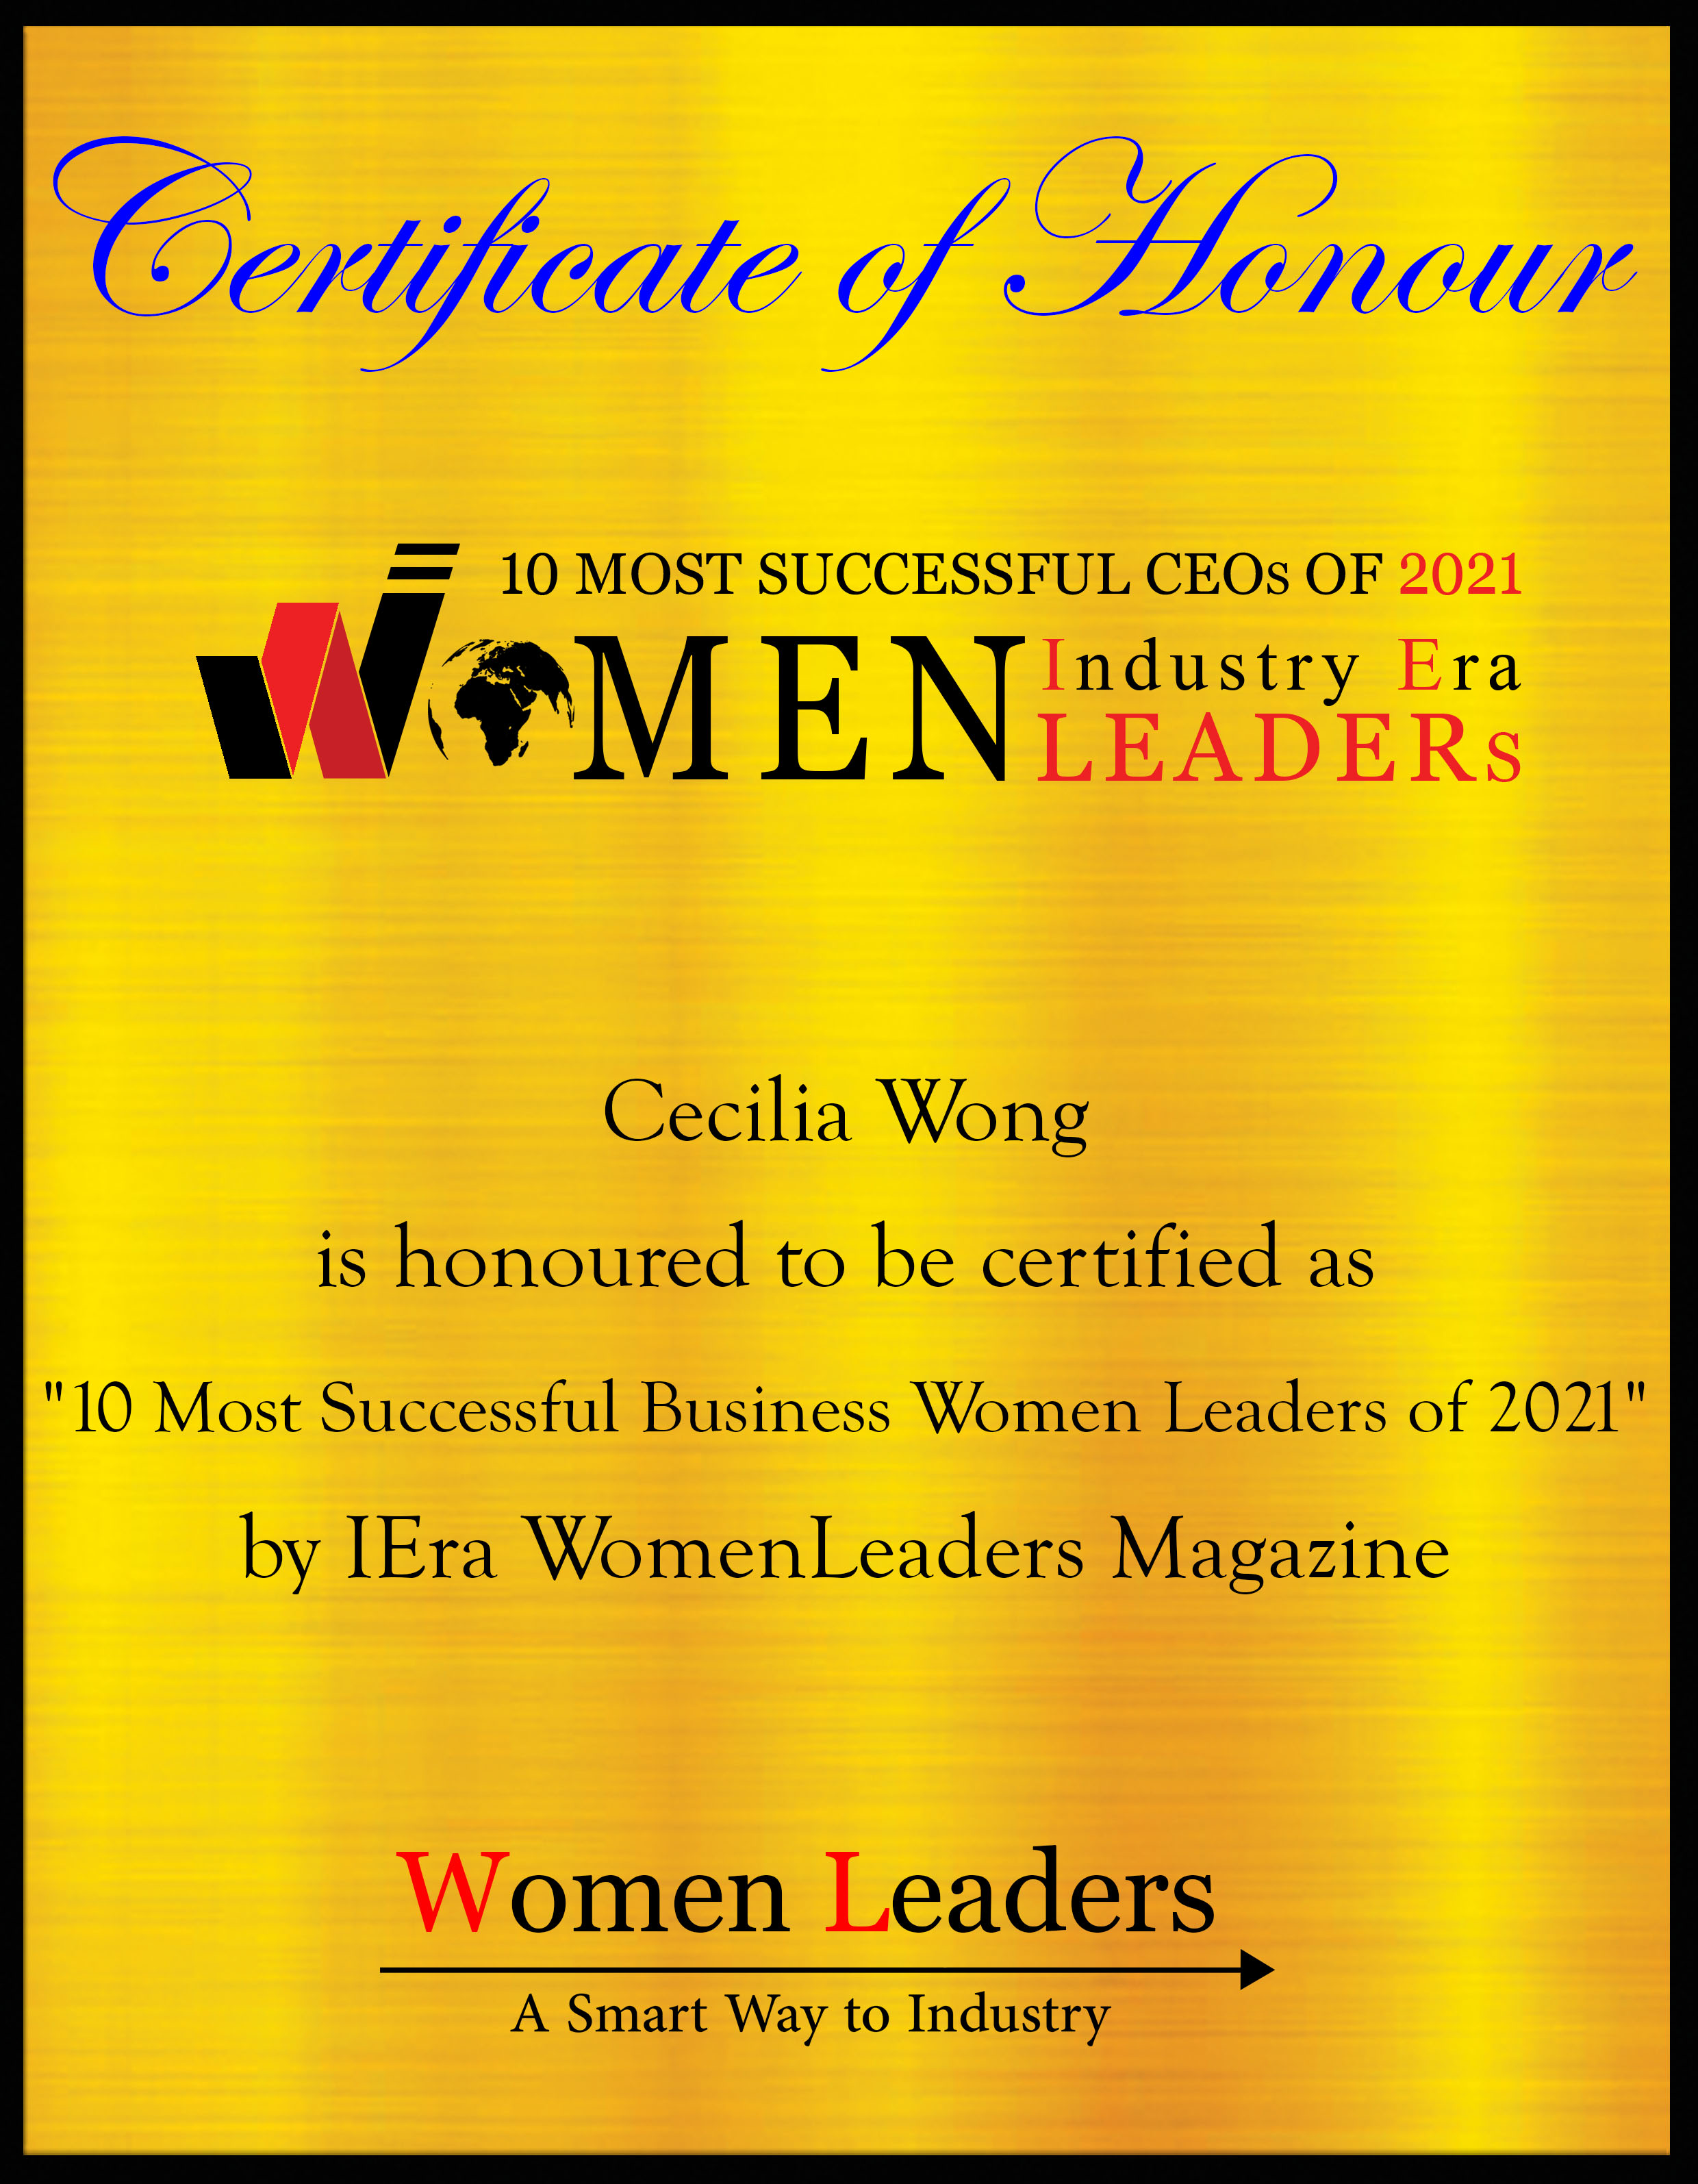 Cecilia Wong, Executive Vice President of Product & Innovations at HGC Global Communications Limited, Most Successful Business Women Leaders of 2021